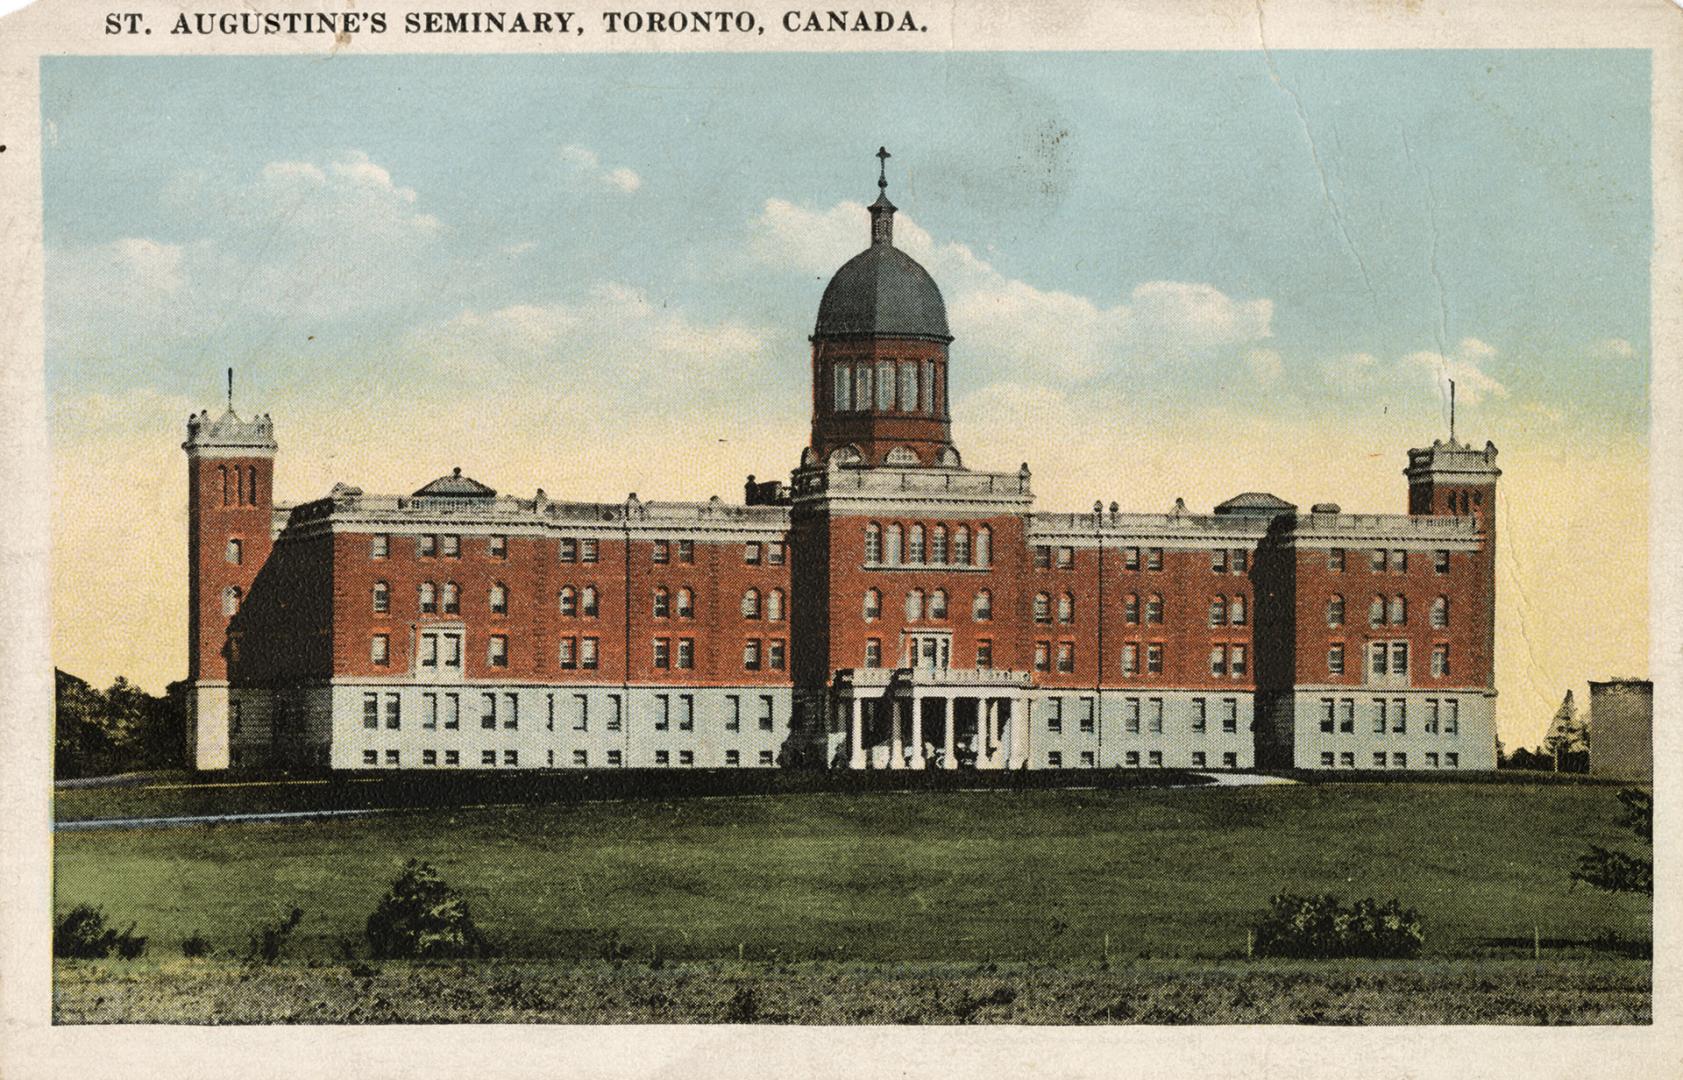 Colour postcard depicting a photo of the exterior of St. Augustine's seminary, with caption, "S ...